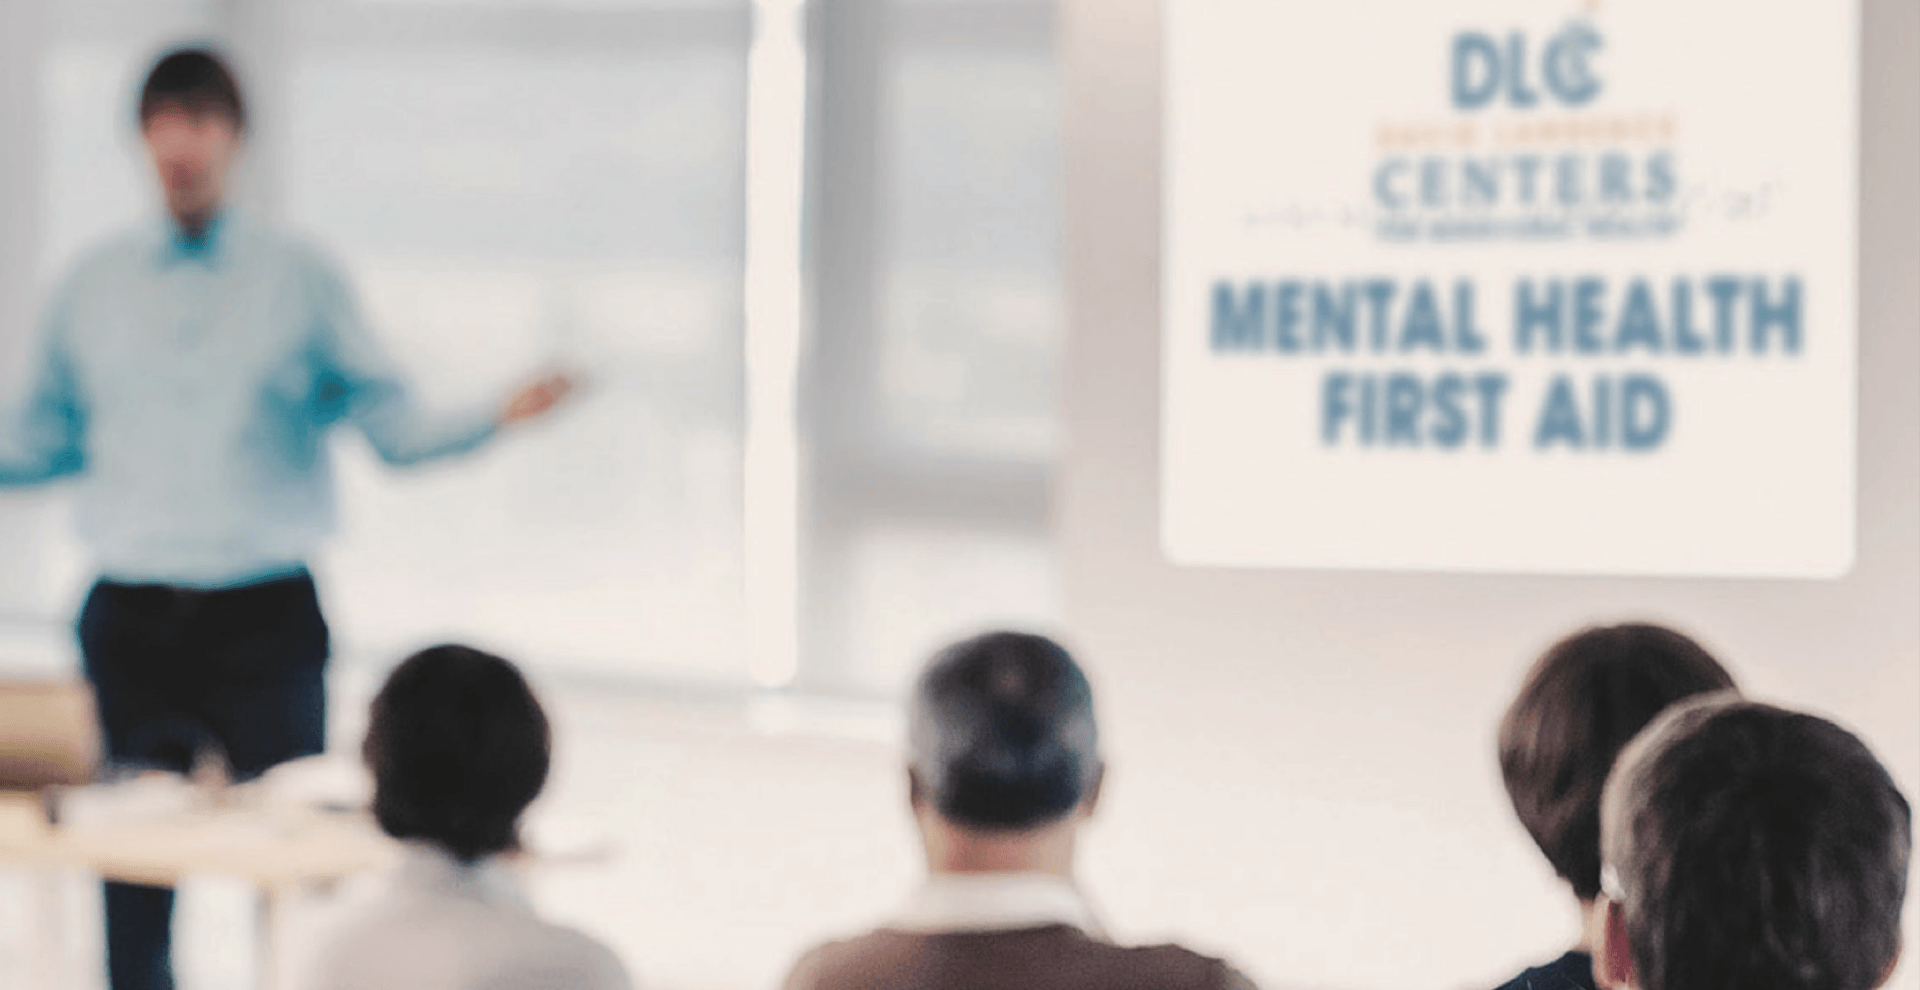 August 14th Adult Mental Health First Aid Training (In-Person Instructor-Led Session)